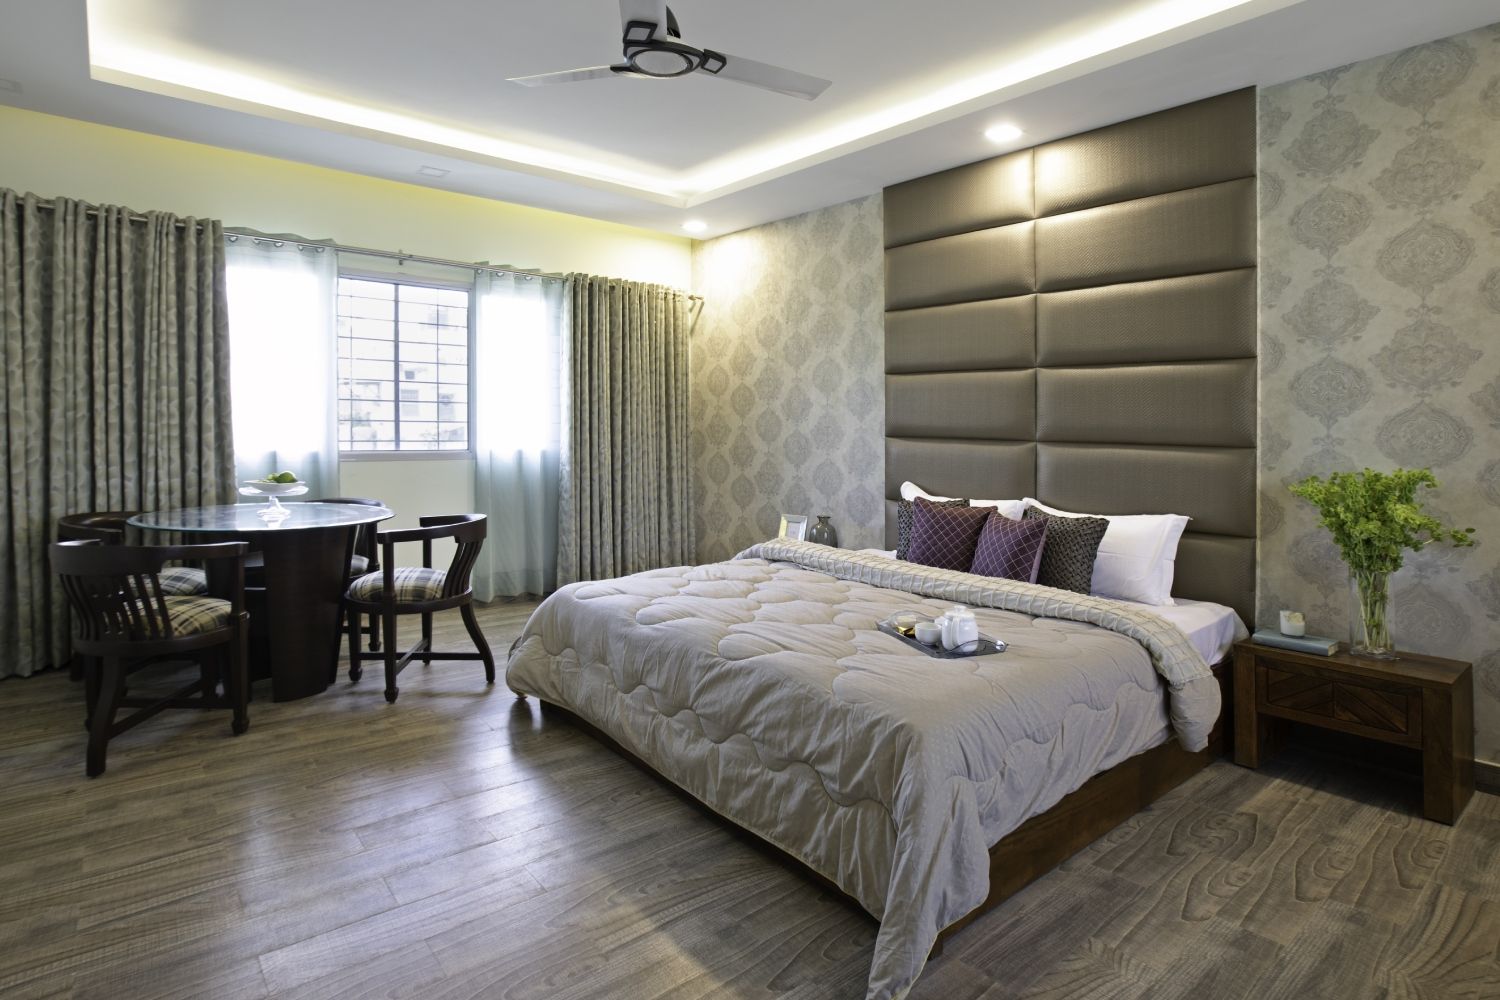 Modern Ceiling Design For Bedrooms With Cove And Recessed Lights